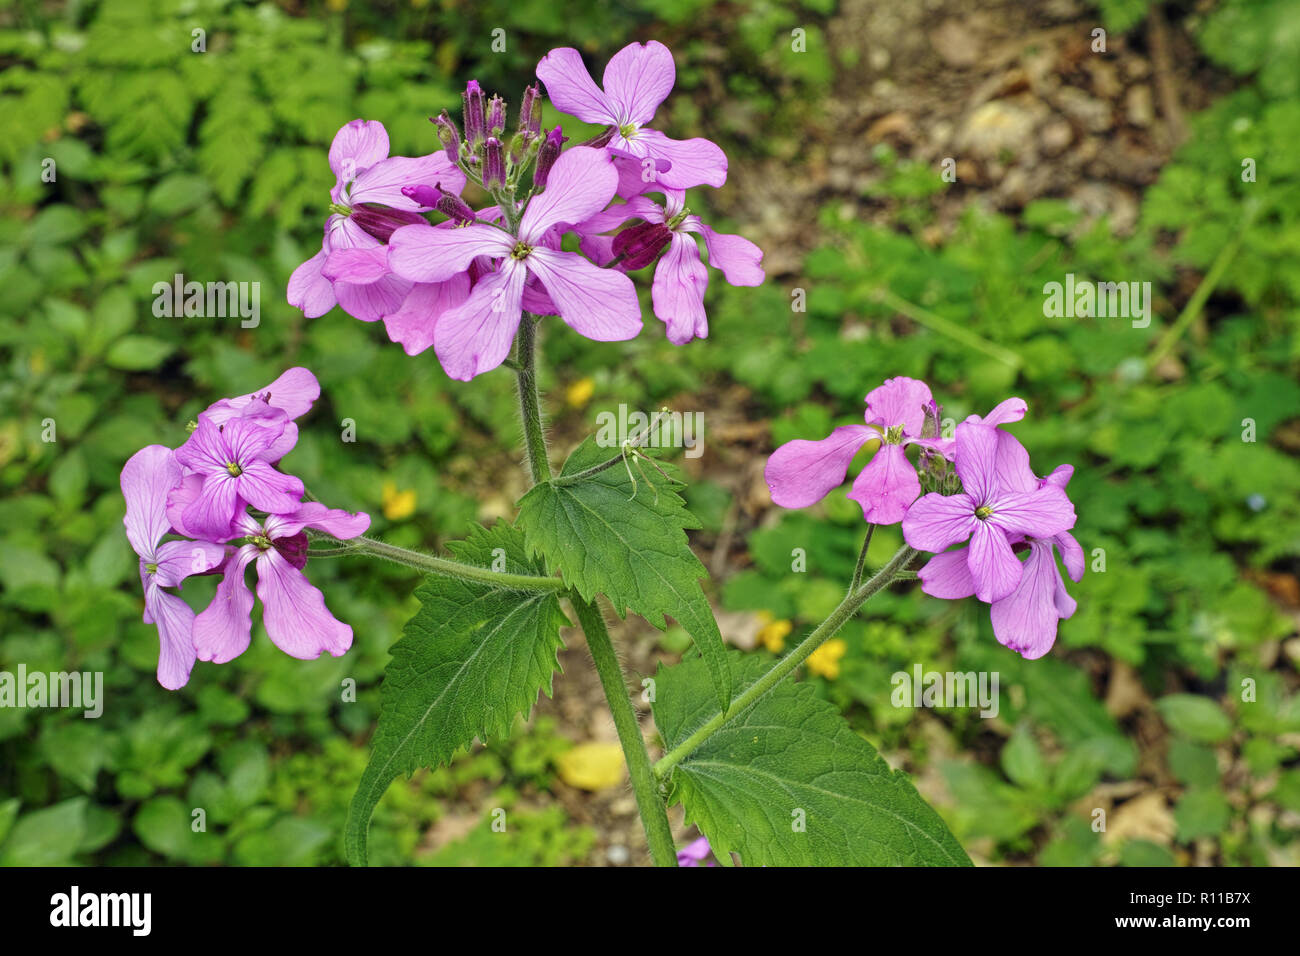 honesty,detail of the flowers and leaves Stock Photo